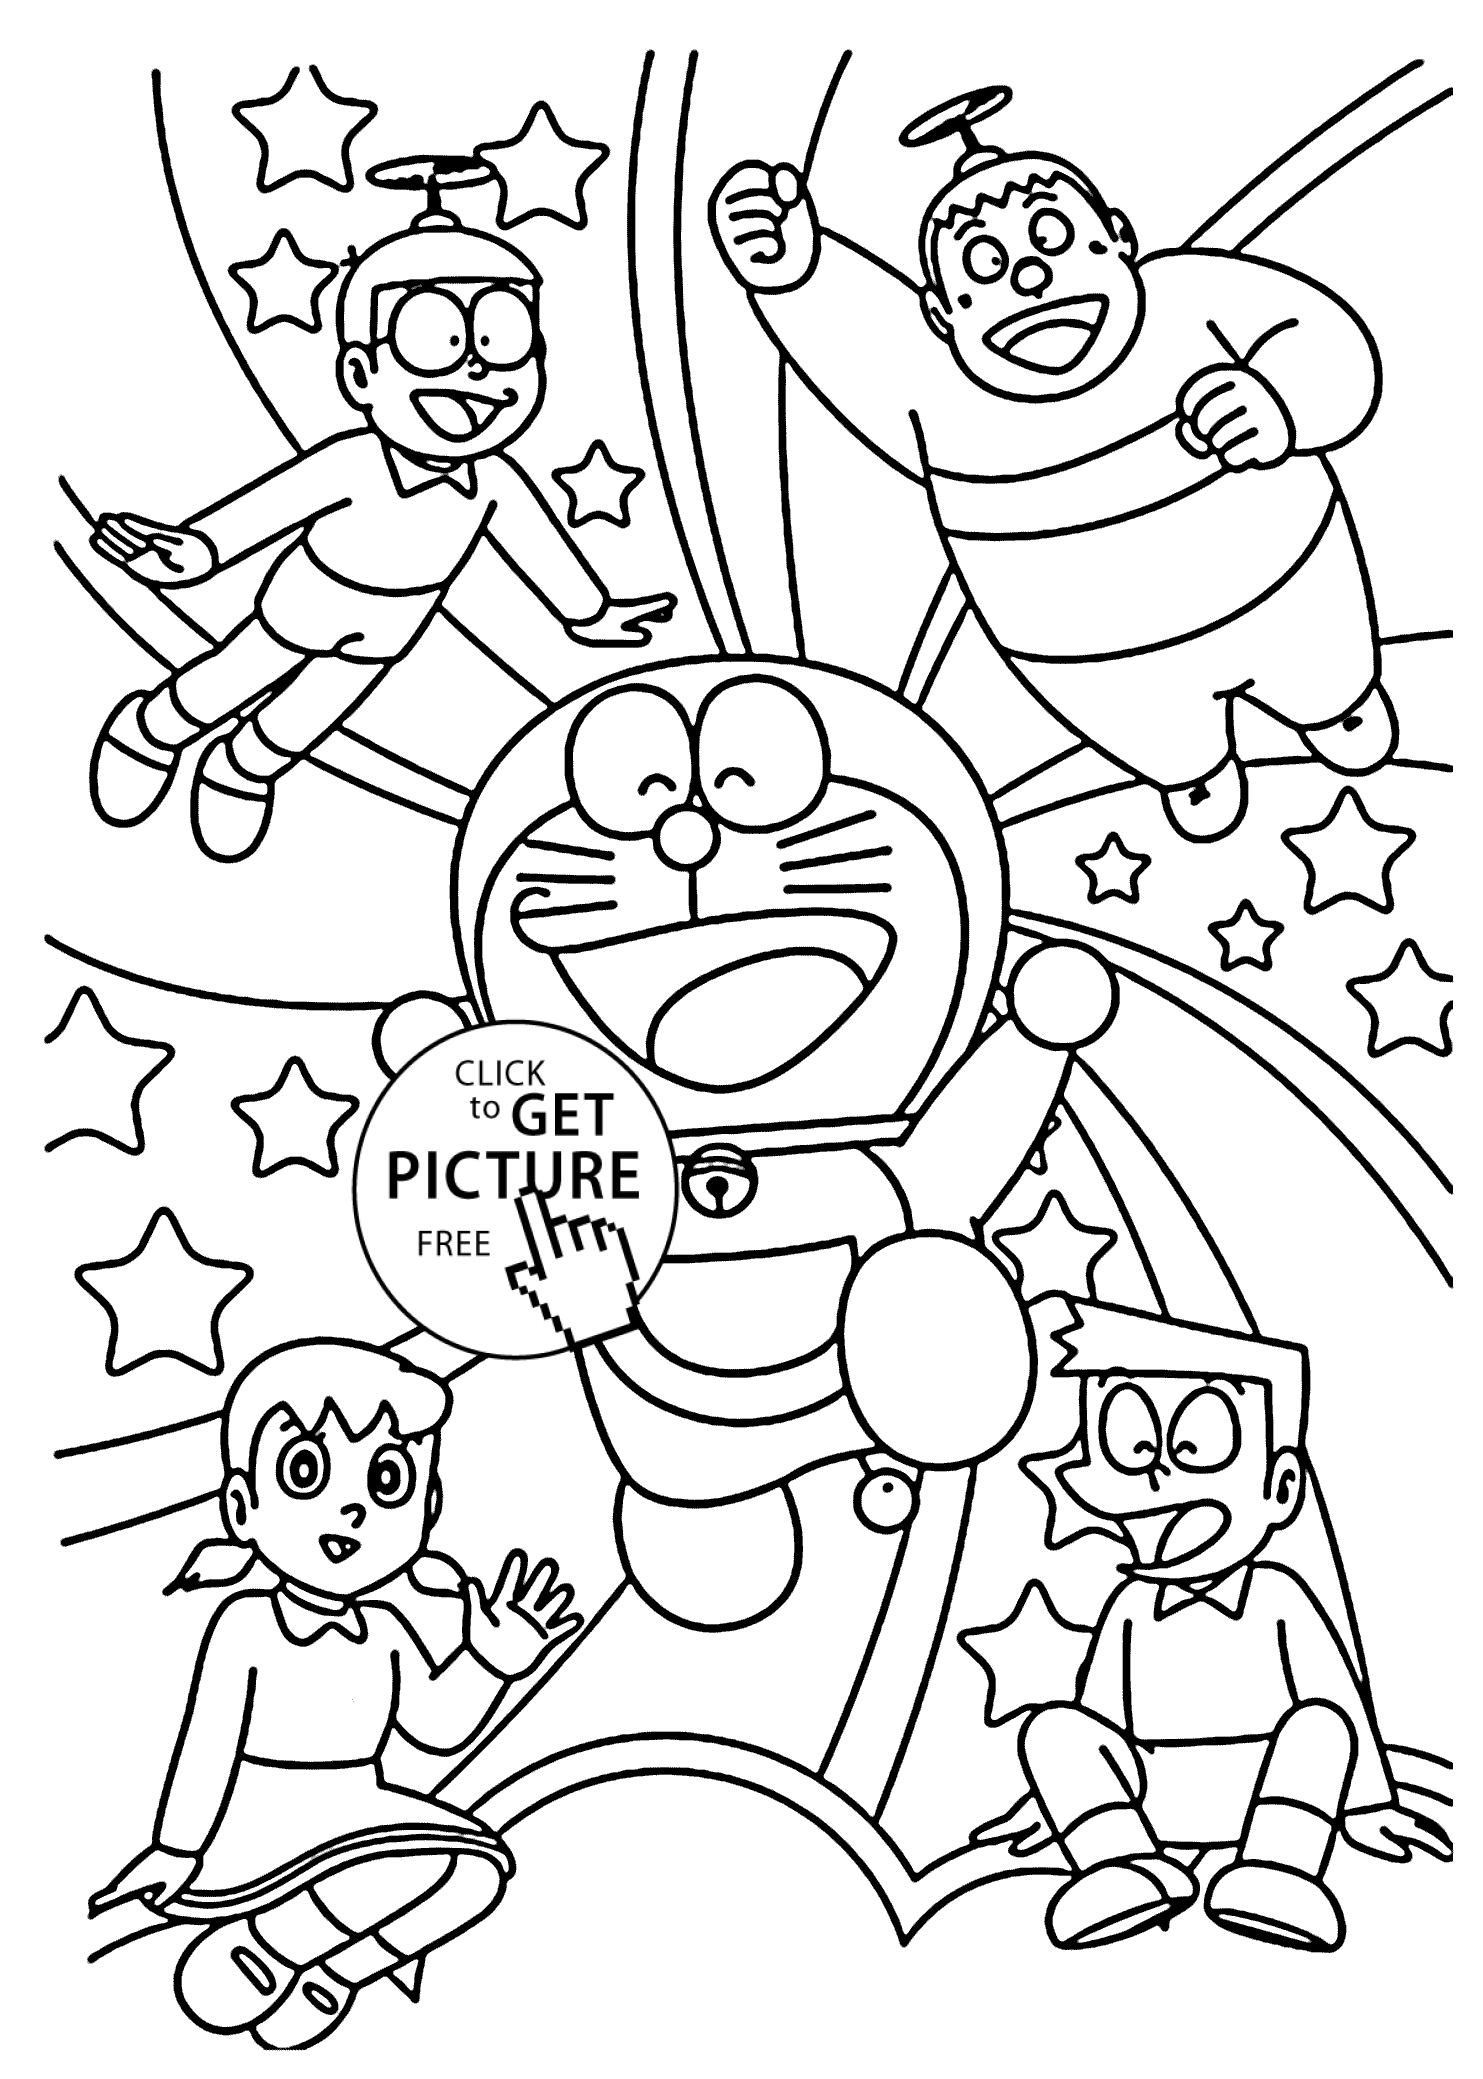 Download Friendship Coloring Pages Printable - Coloring Home